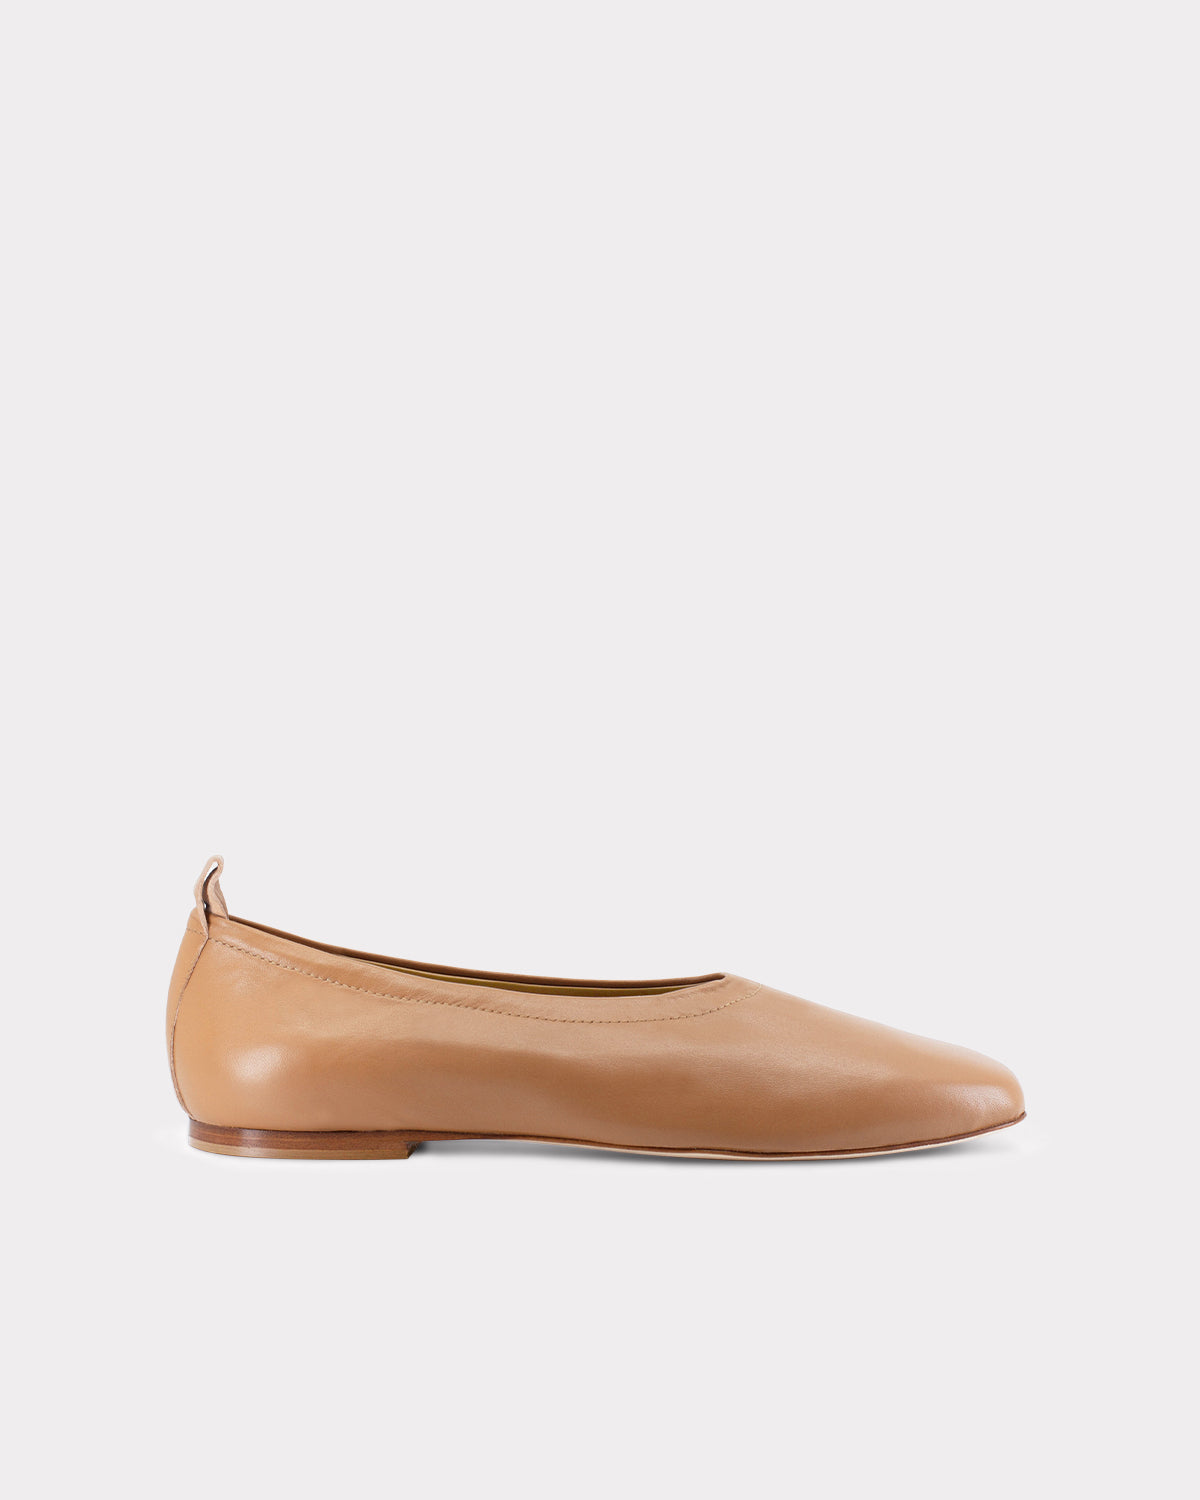 ethically sourced leather flats in tan